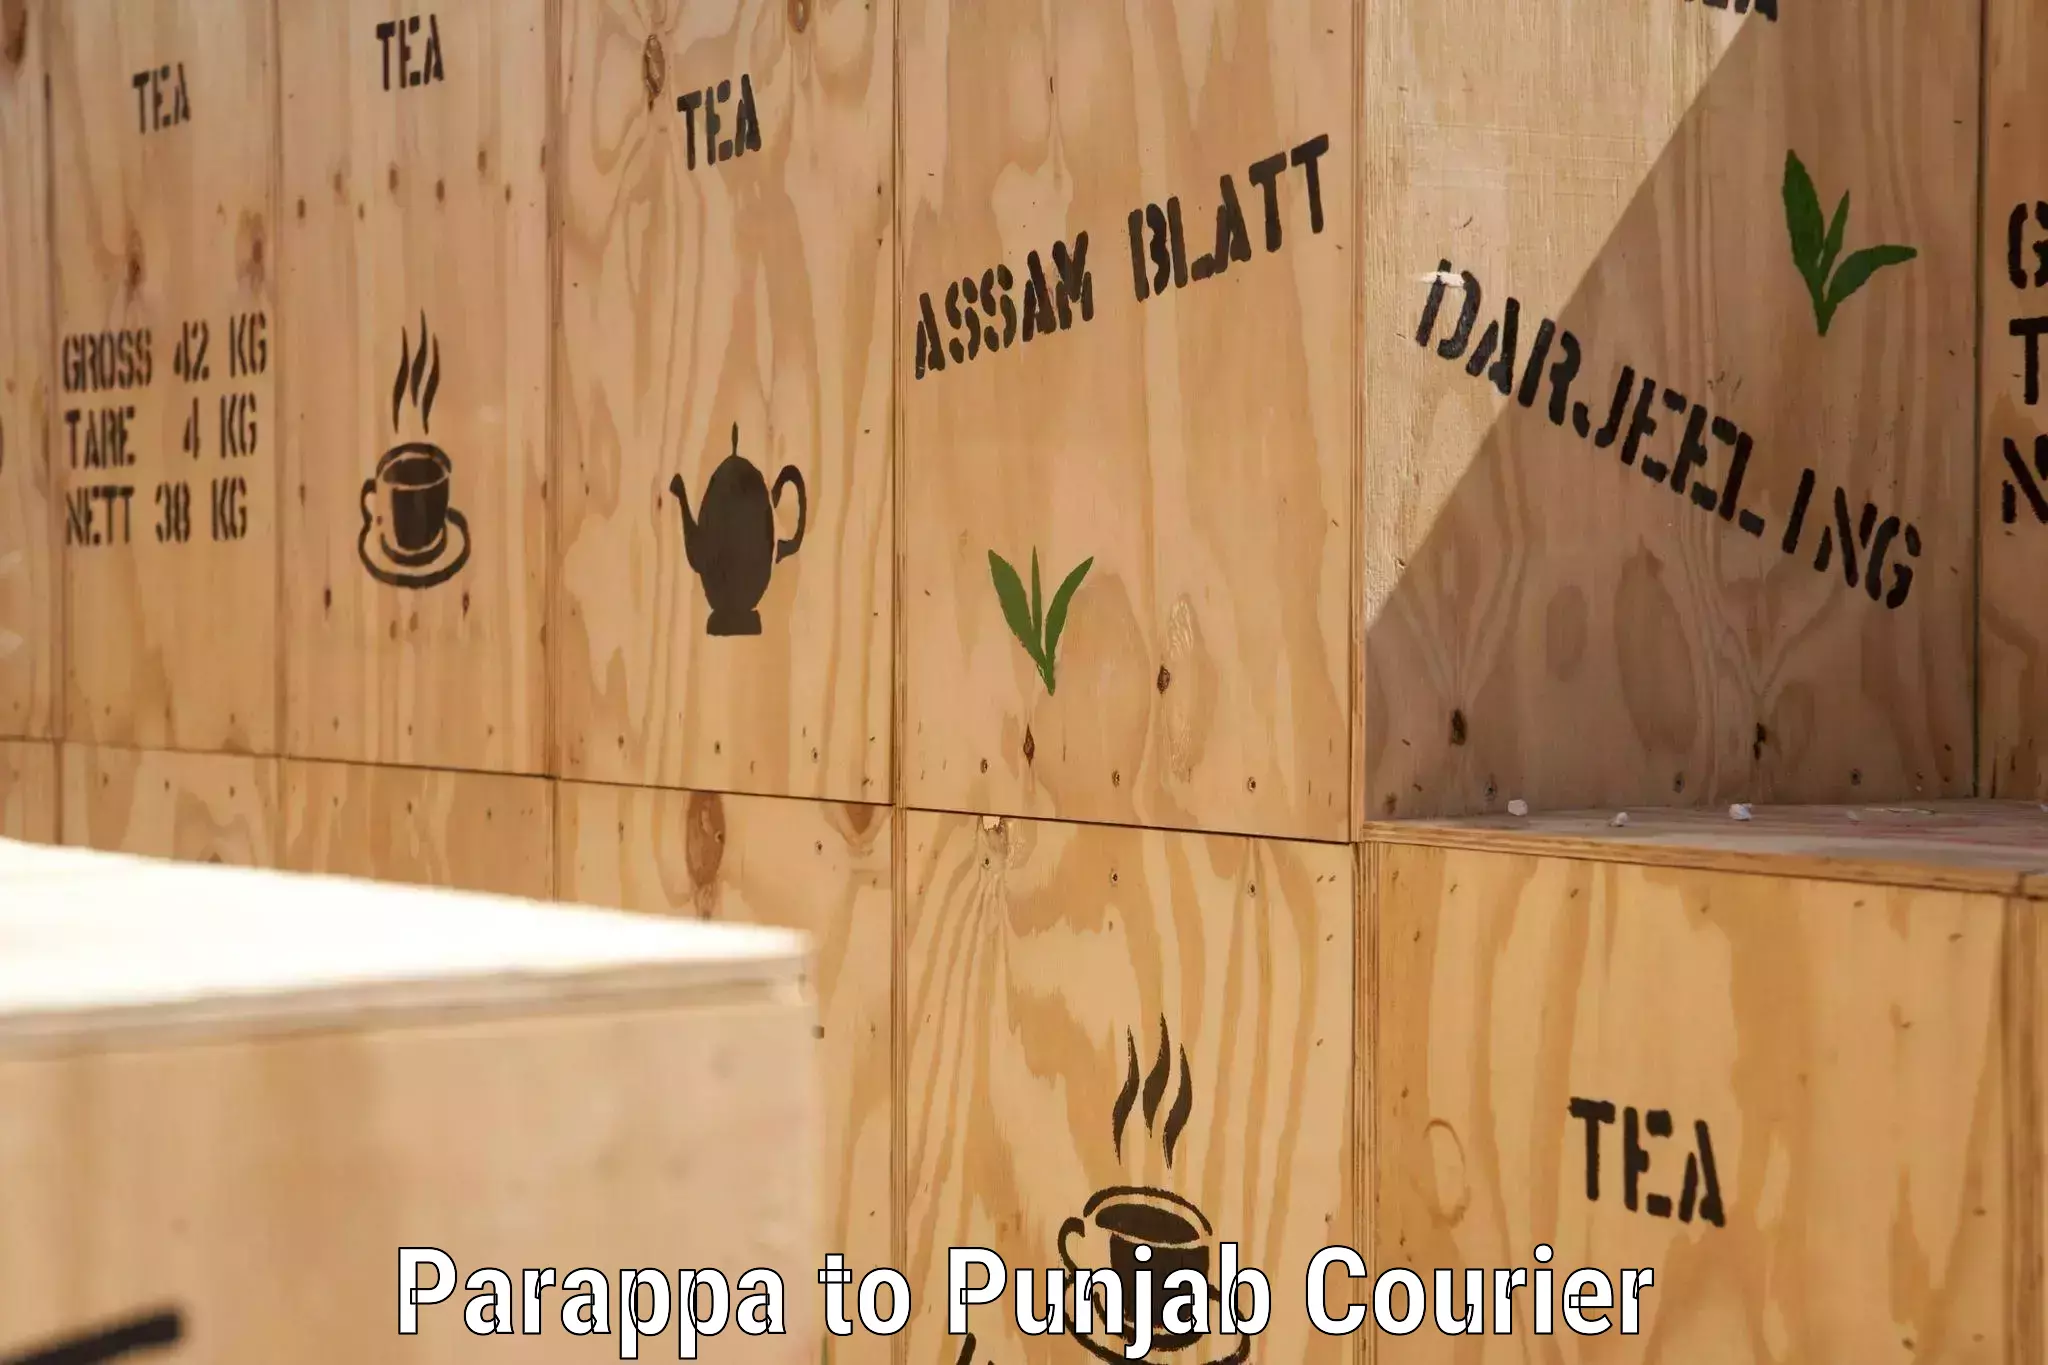 Next day courier Parappa to Amritsar